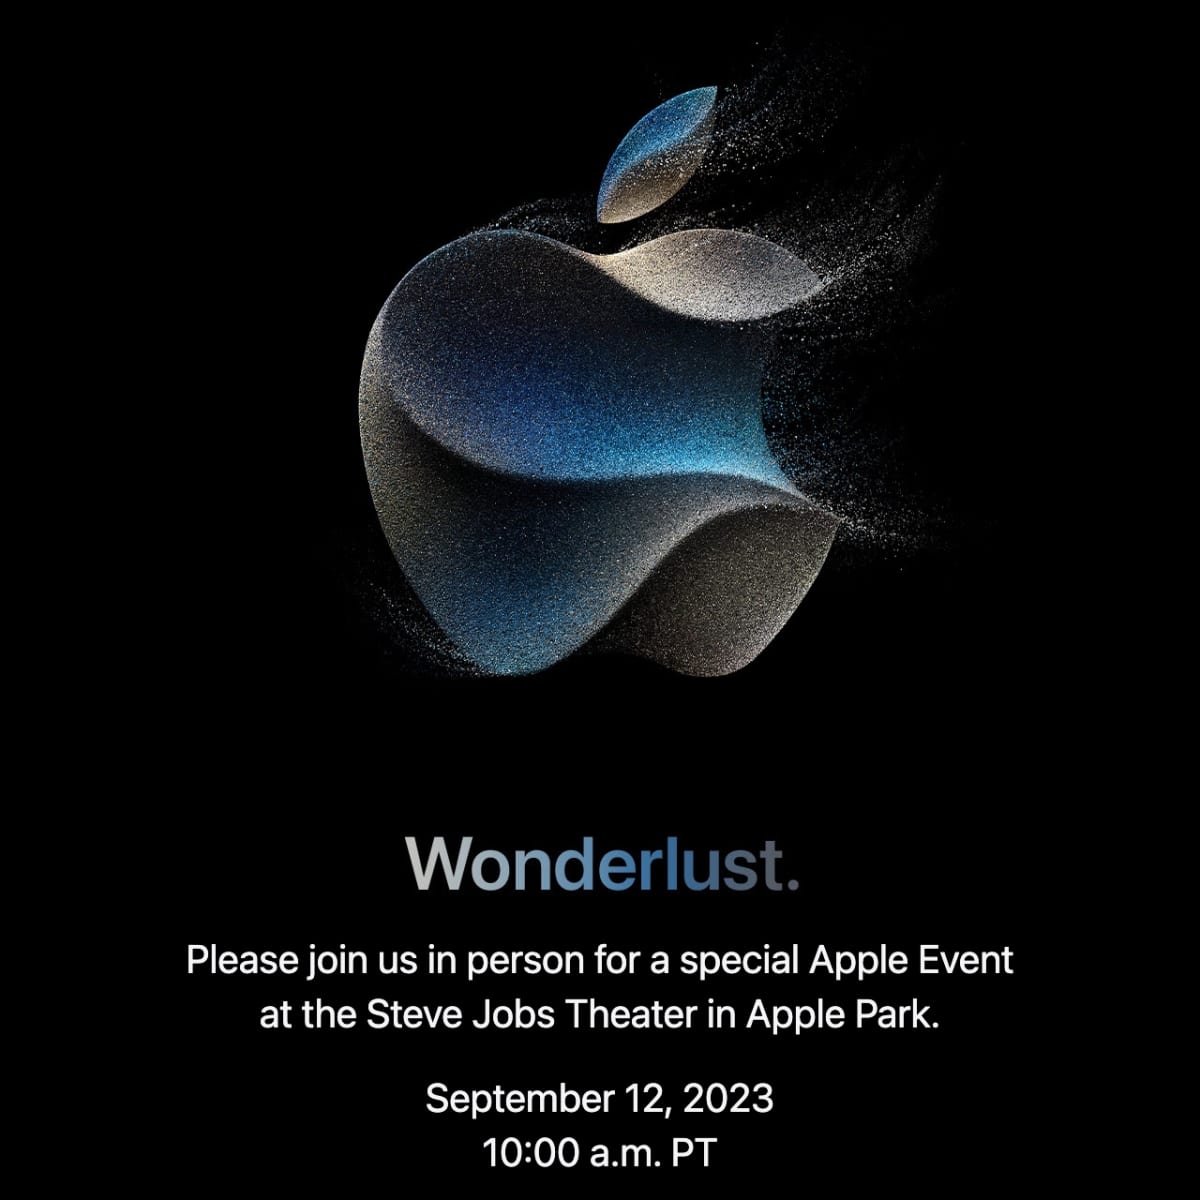 Apple's September Event Could See New iPhones u0026 Apple Watches - TheStreet